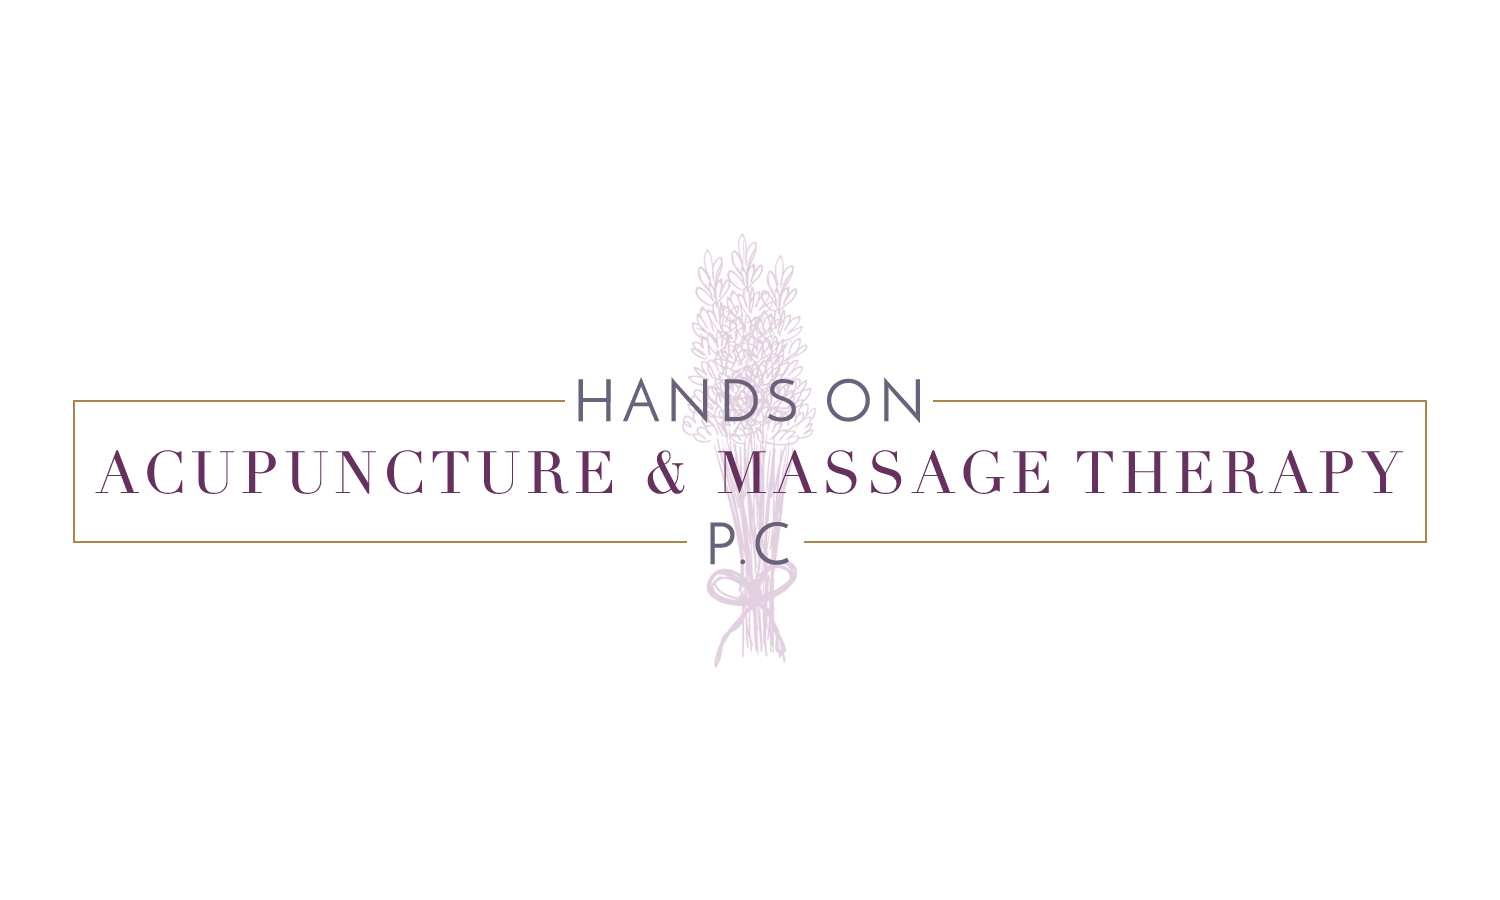 Hands On Acupuncture & Massage Therapy, P.C.